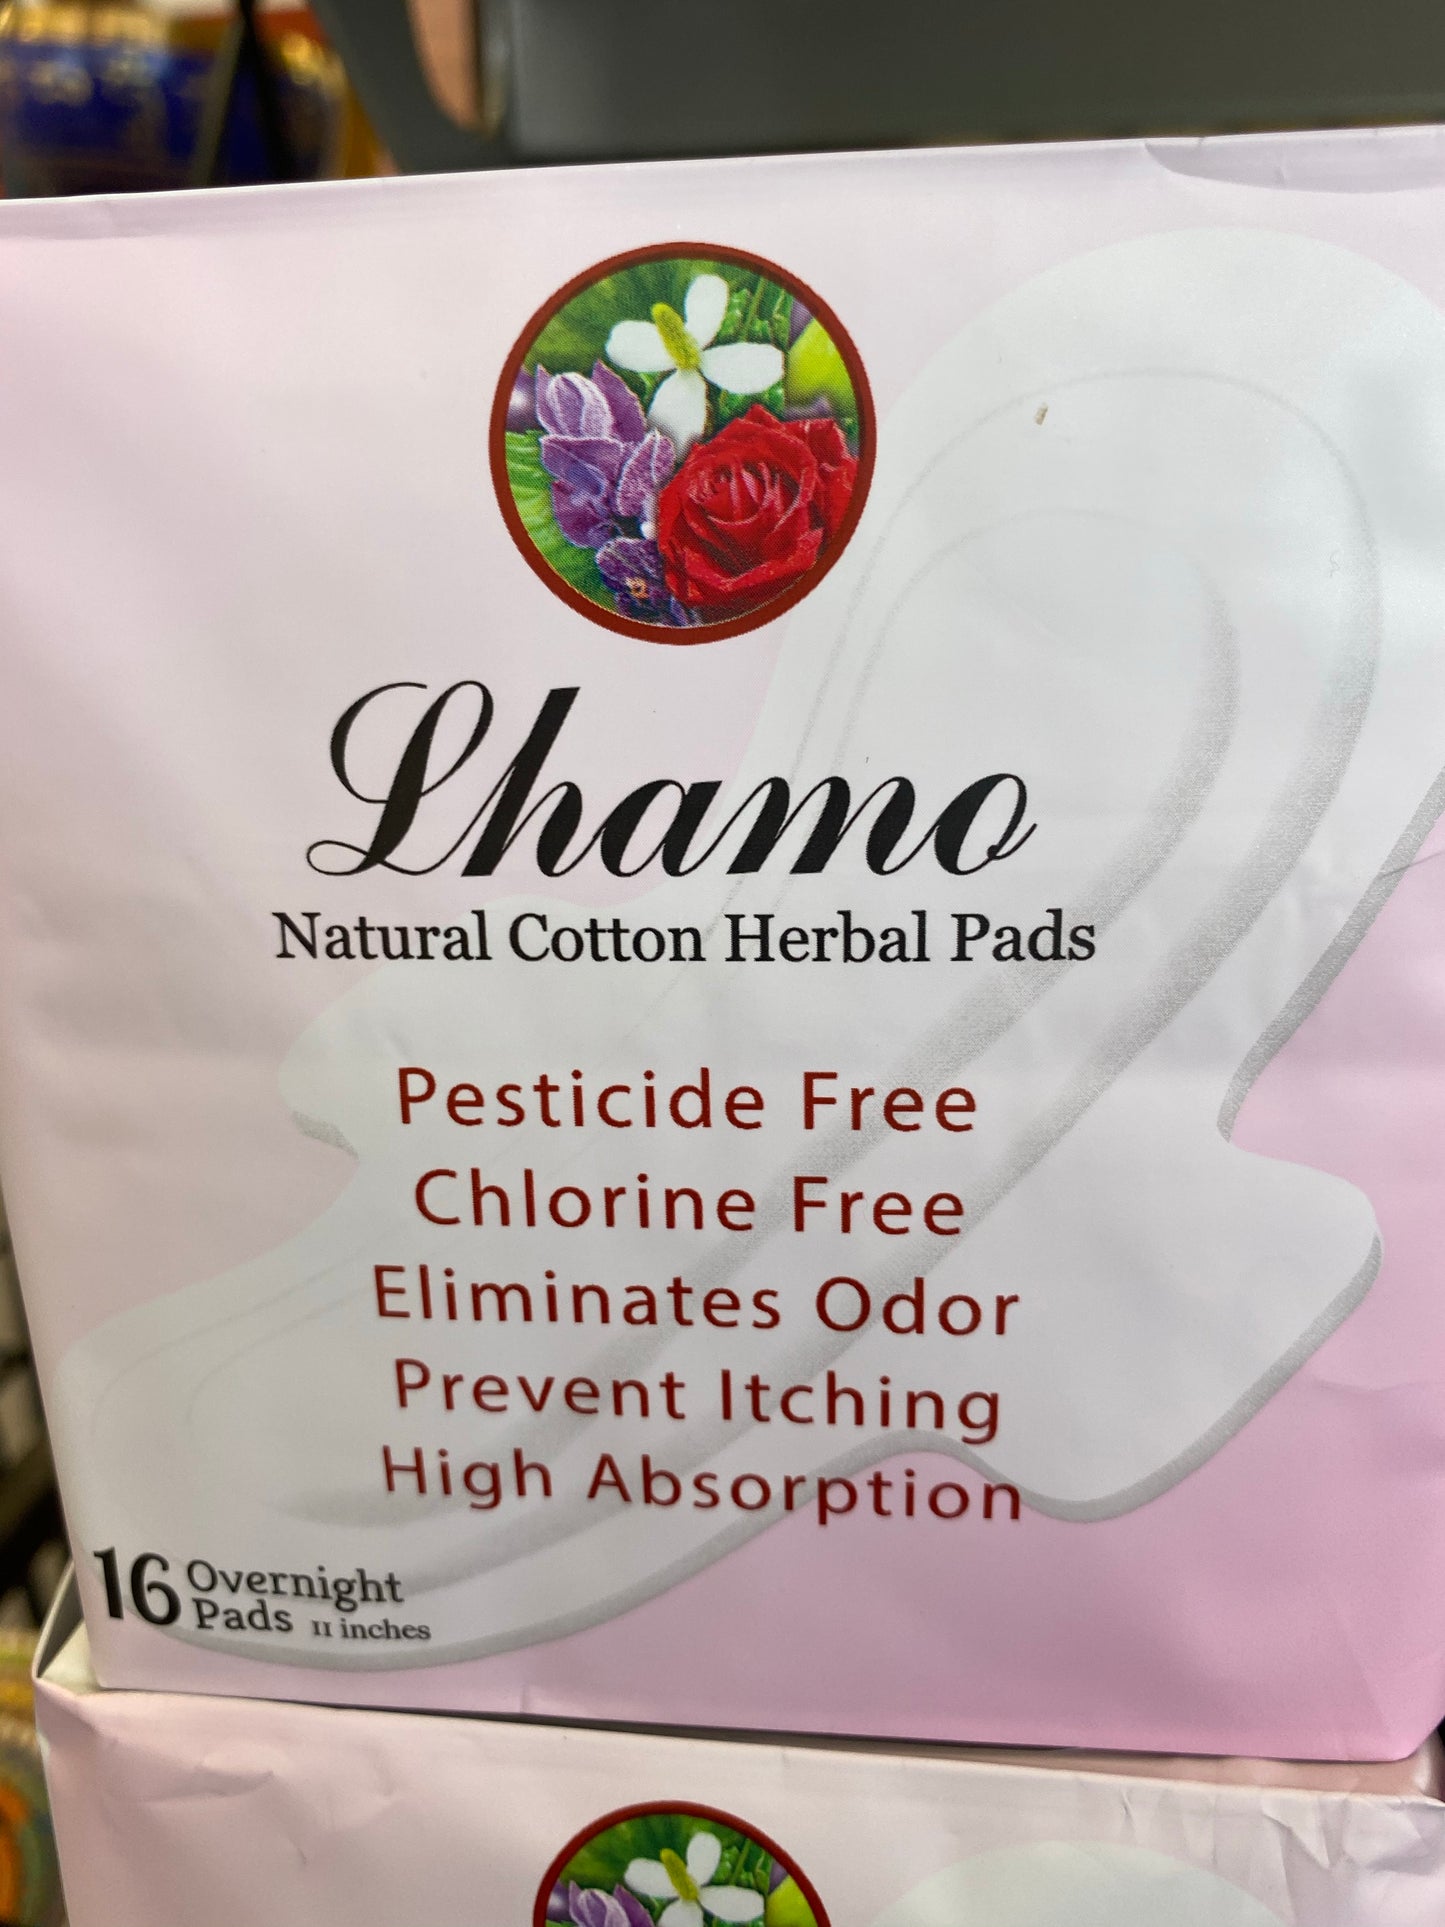 Herbal Pads for women